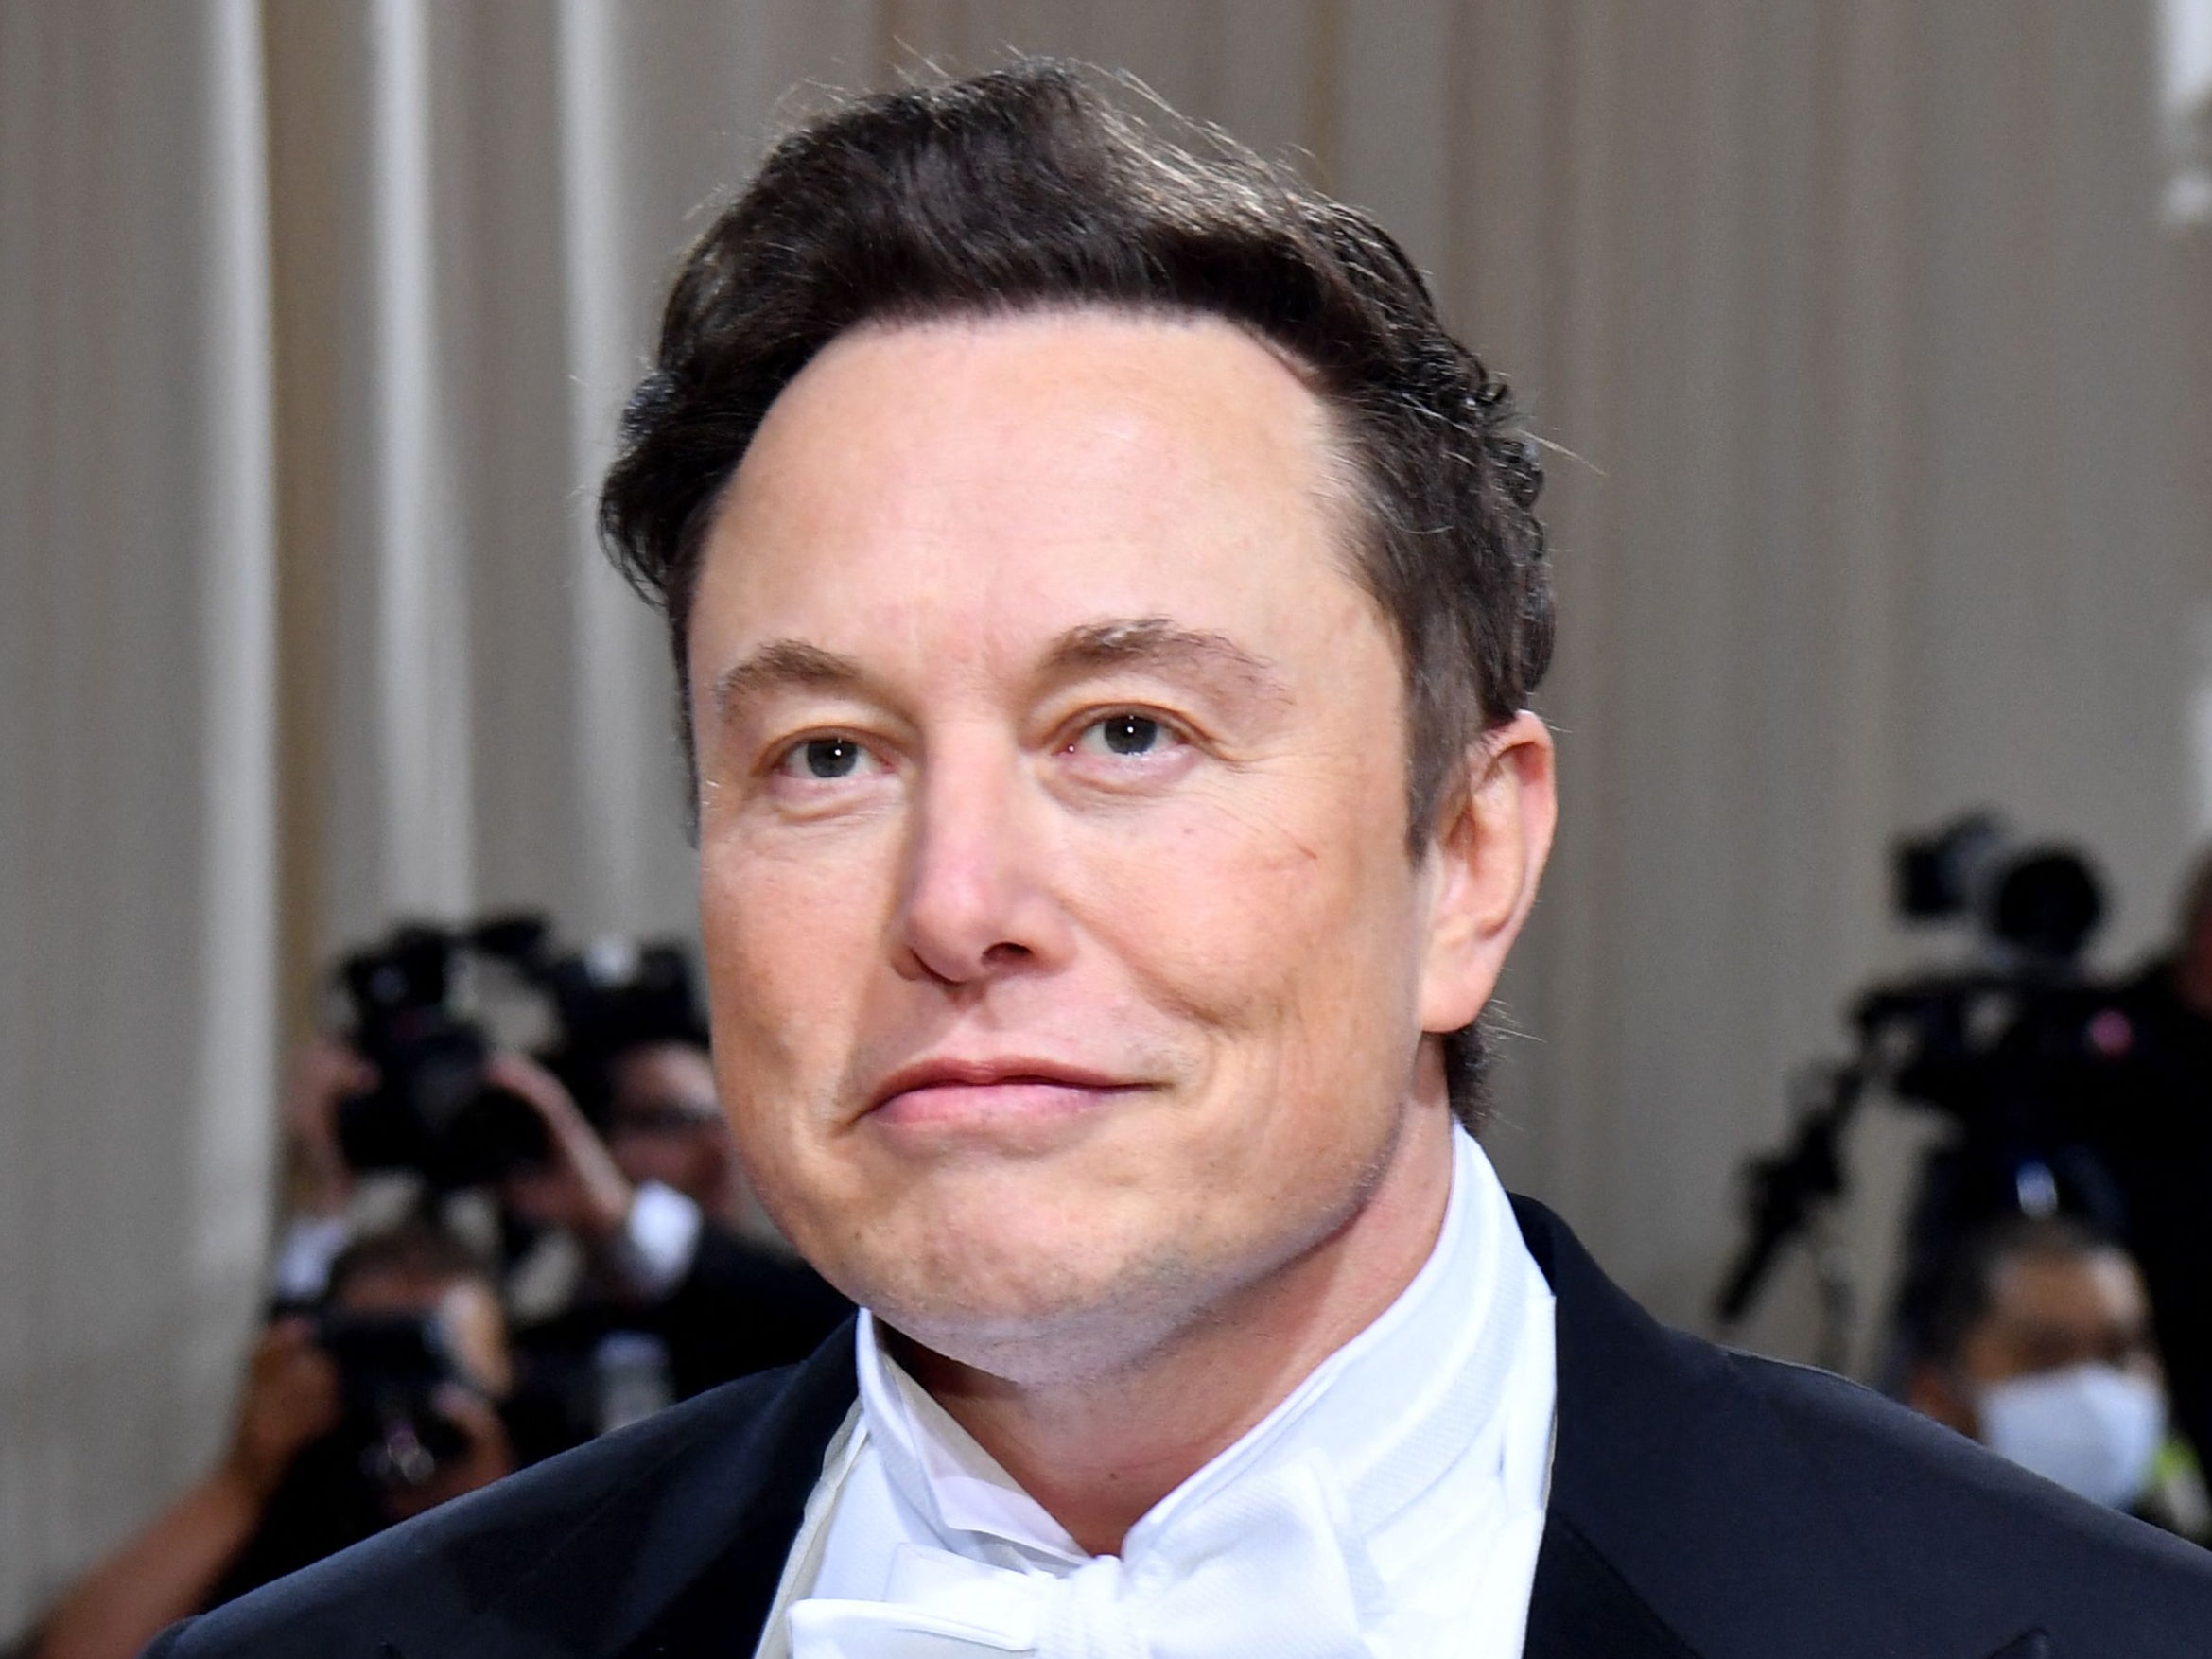 Elon Musk has expressed concerns about population decline before